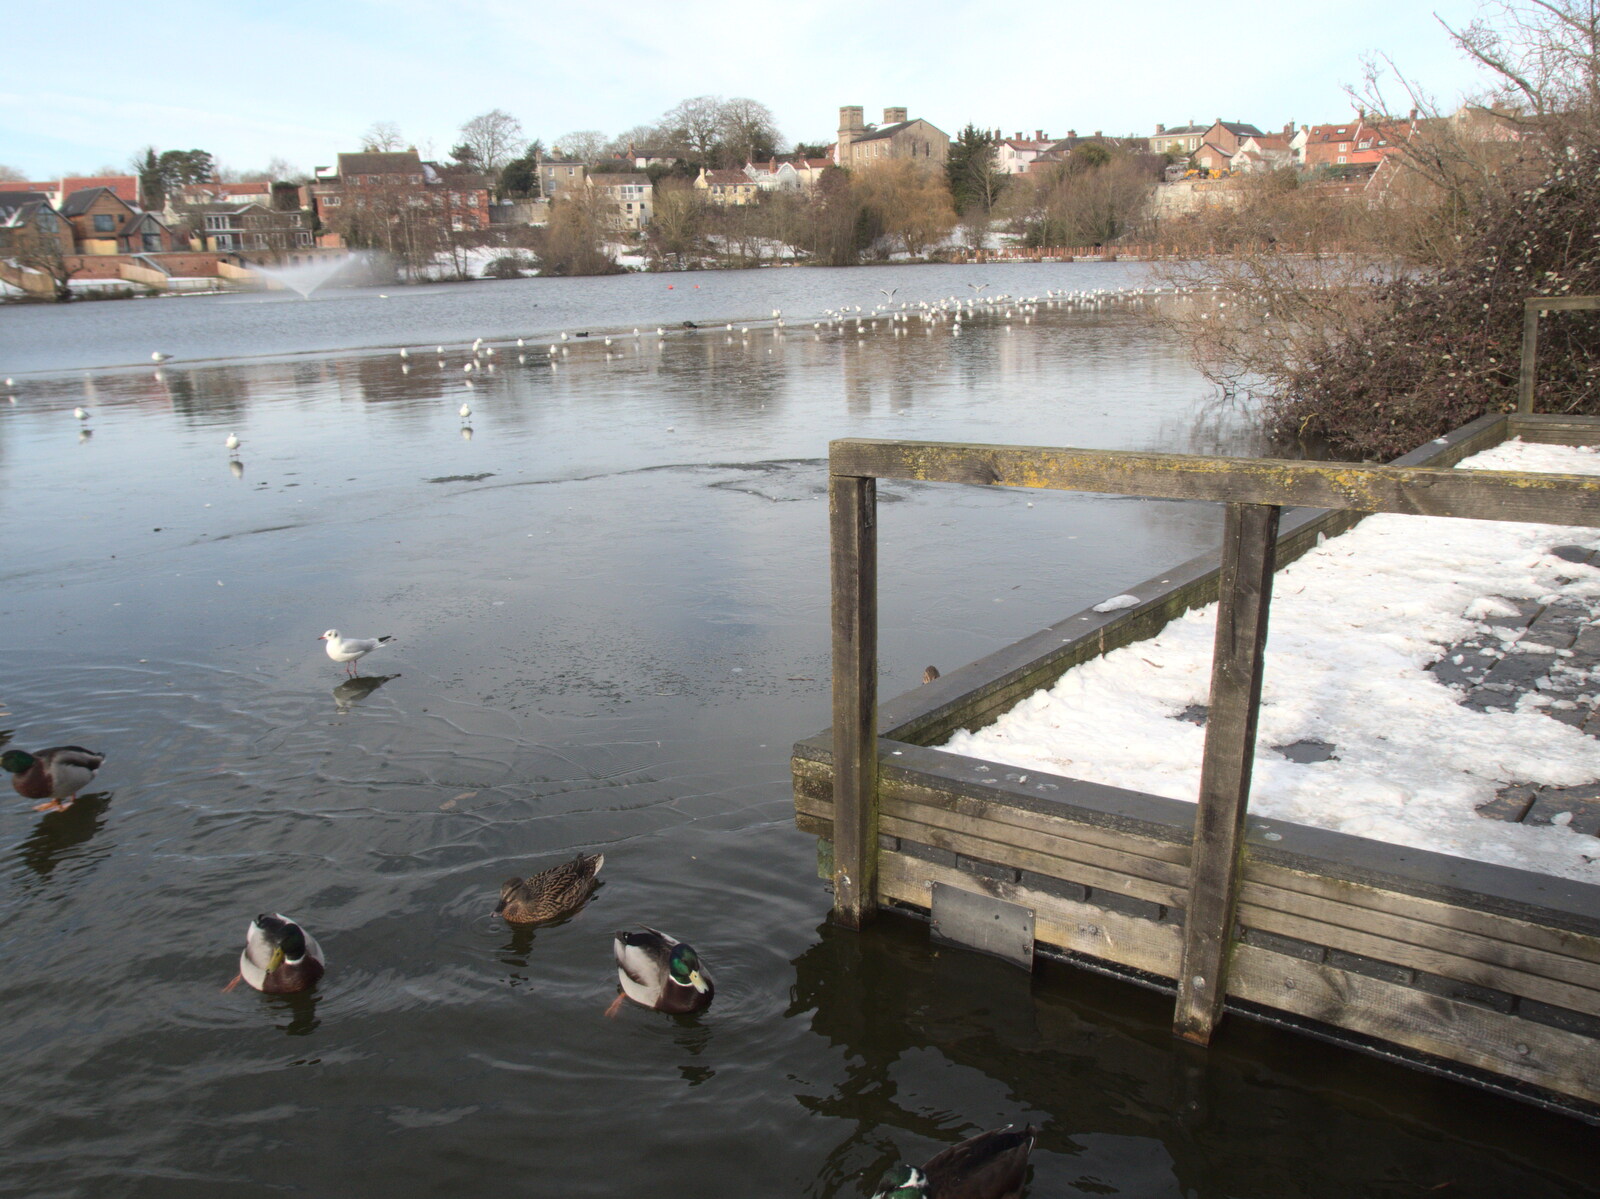 The water level on the Mere is still high from Derelict Infants School and Ice Sculptures, Diss and Palgrave, Norfolk and Suffolk - 13th February 2021